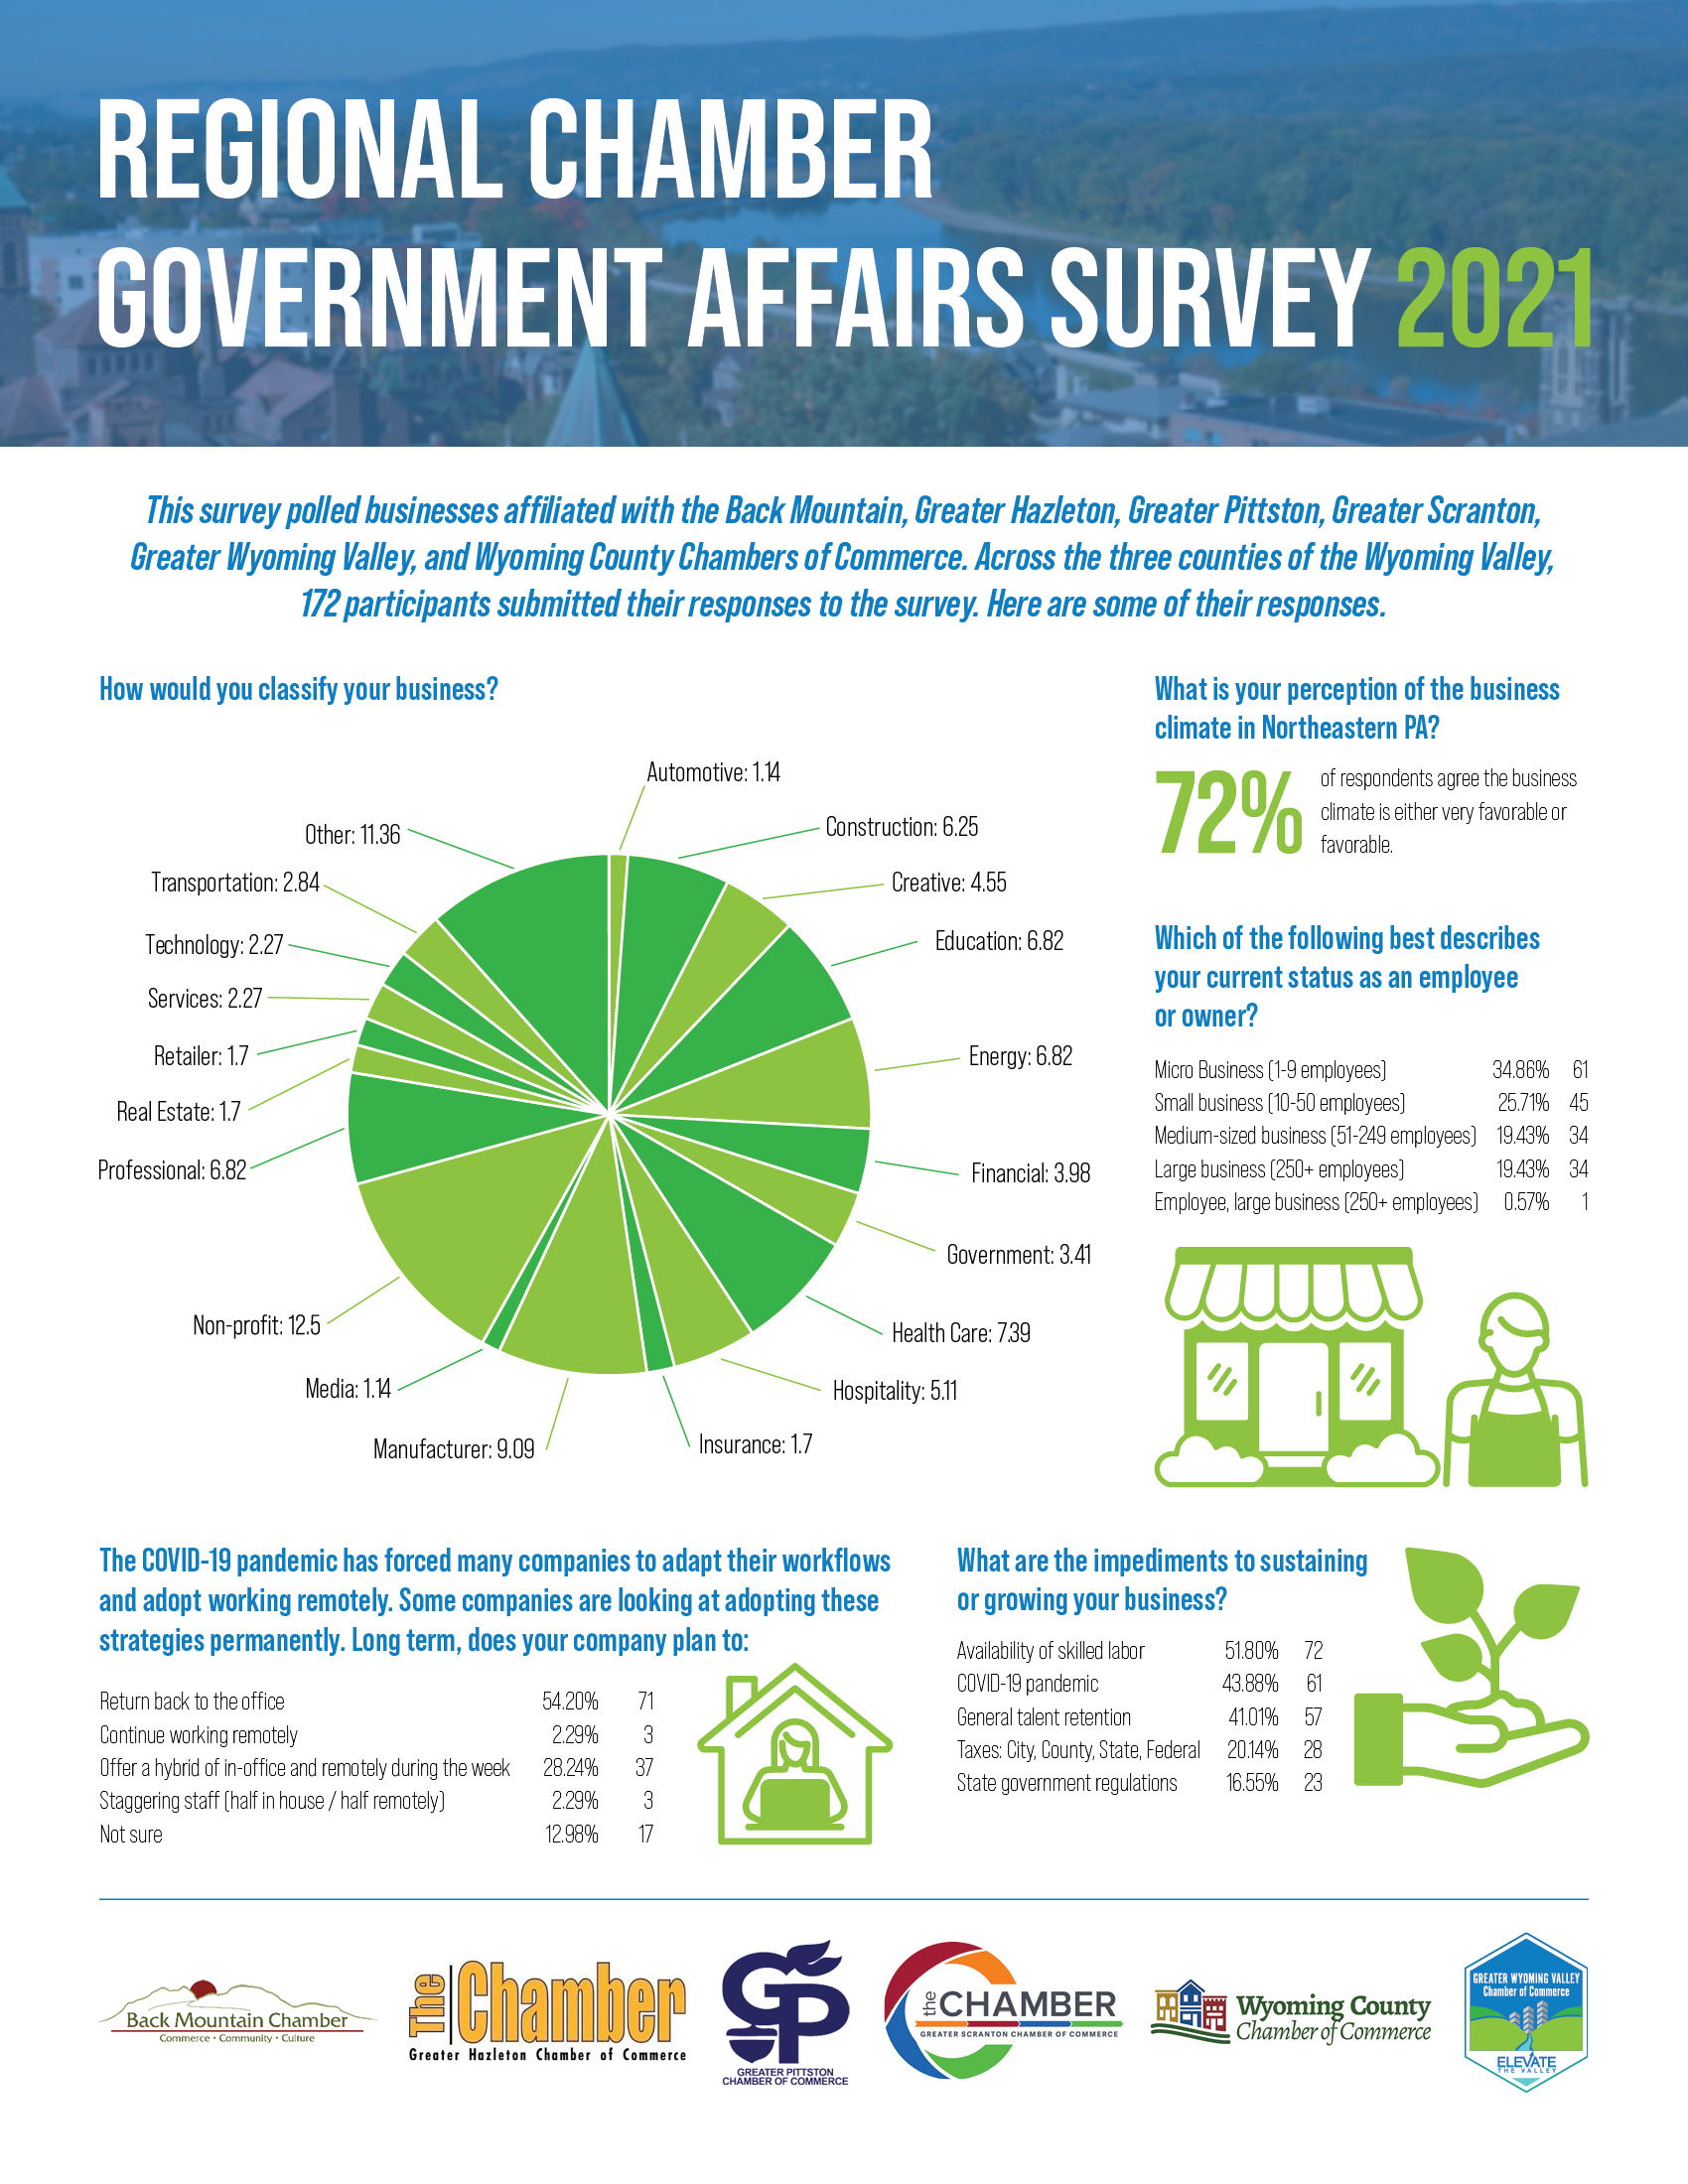 Regional Chamber Government Affairs Survey Results Infographic